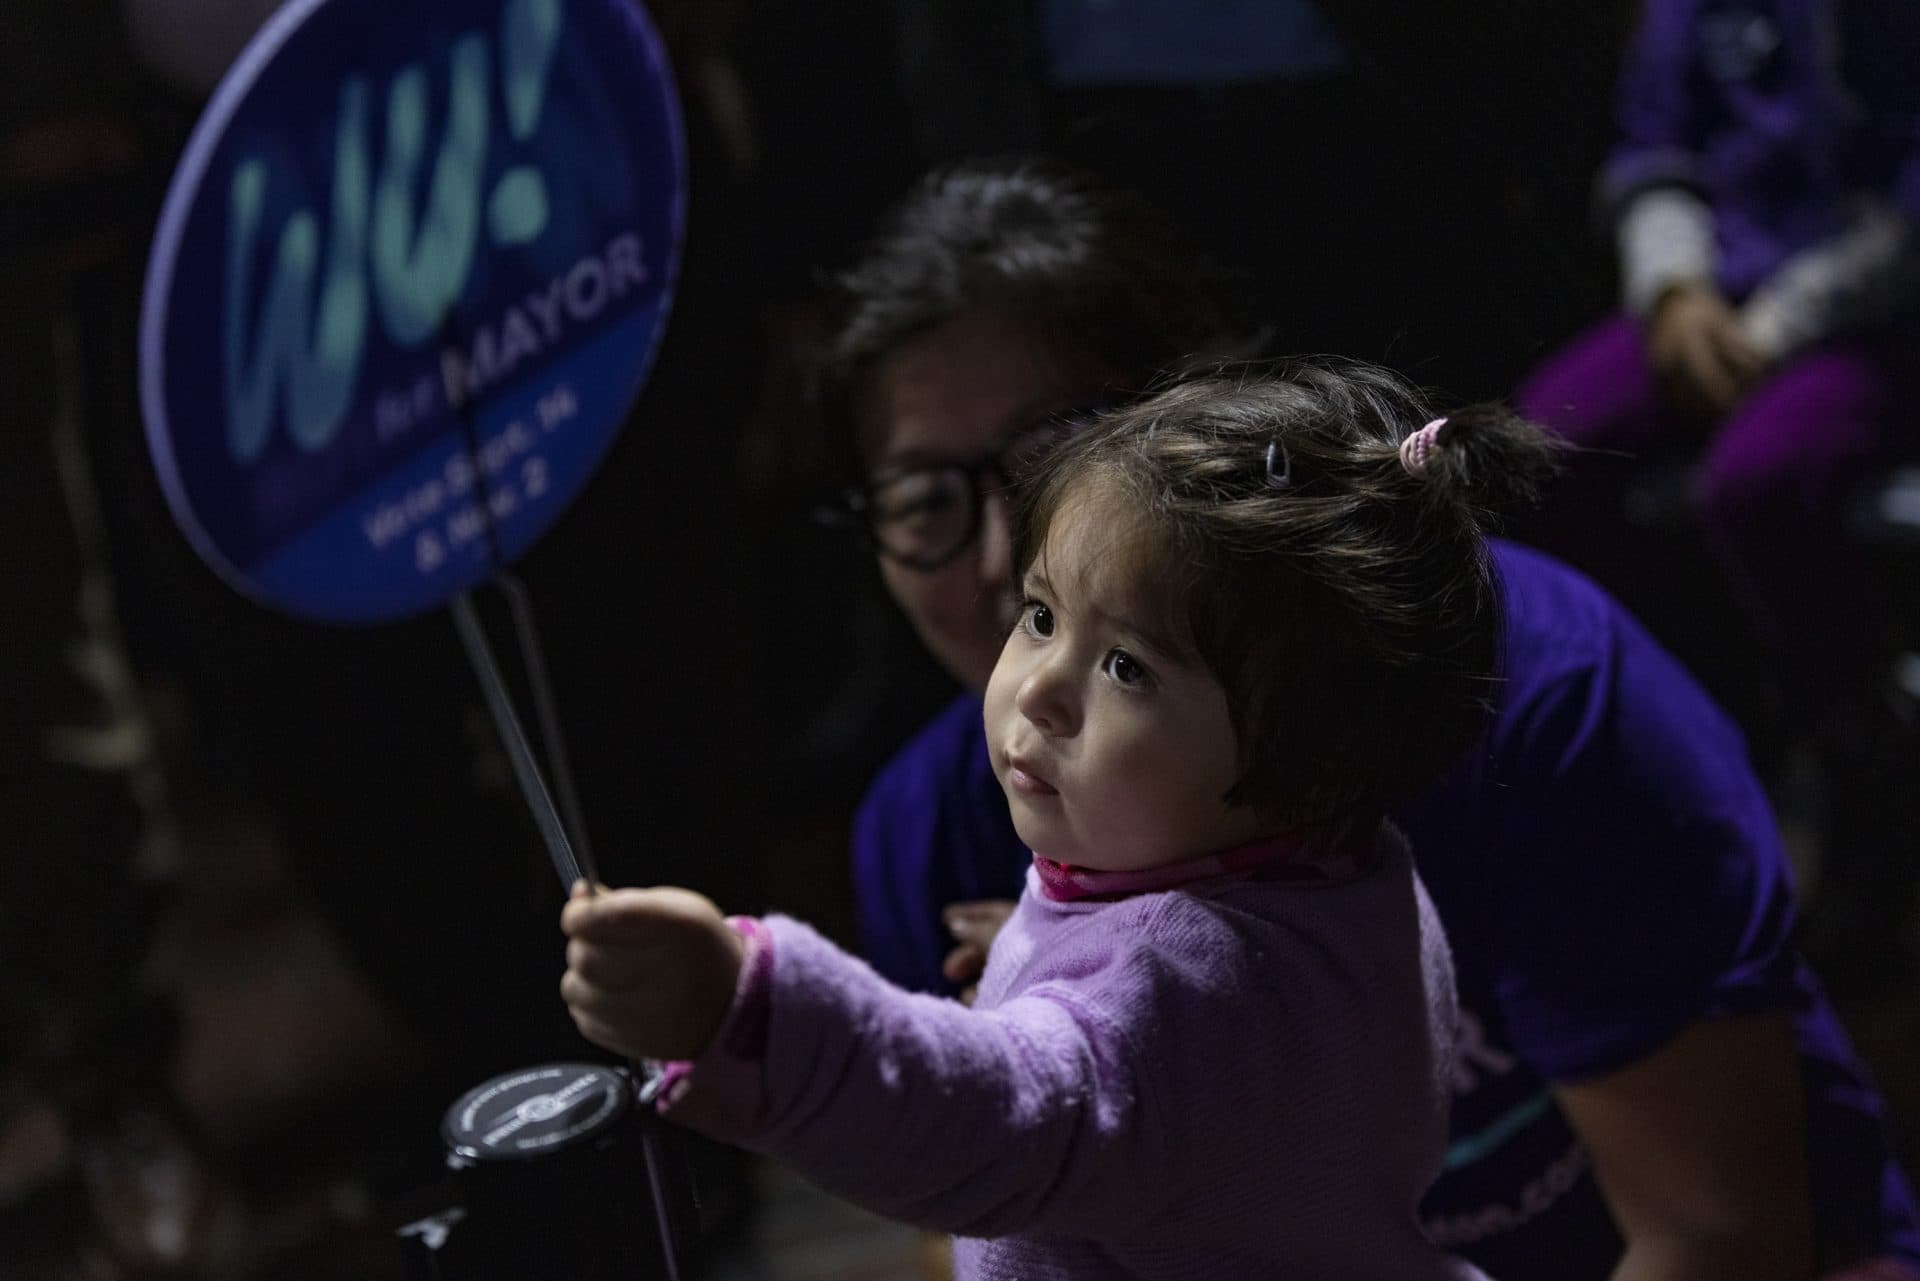 Two-year-old Emily Li-Nagy holds a "Wu for Mayor" sign at the Michelle Wu election night party at the Cyclorama. (Jesse Costa/WBUR)